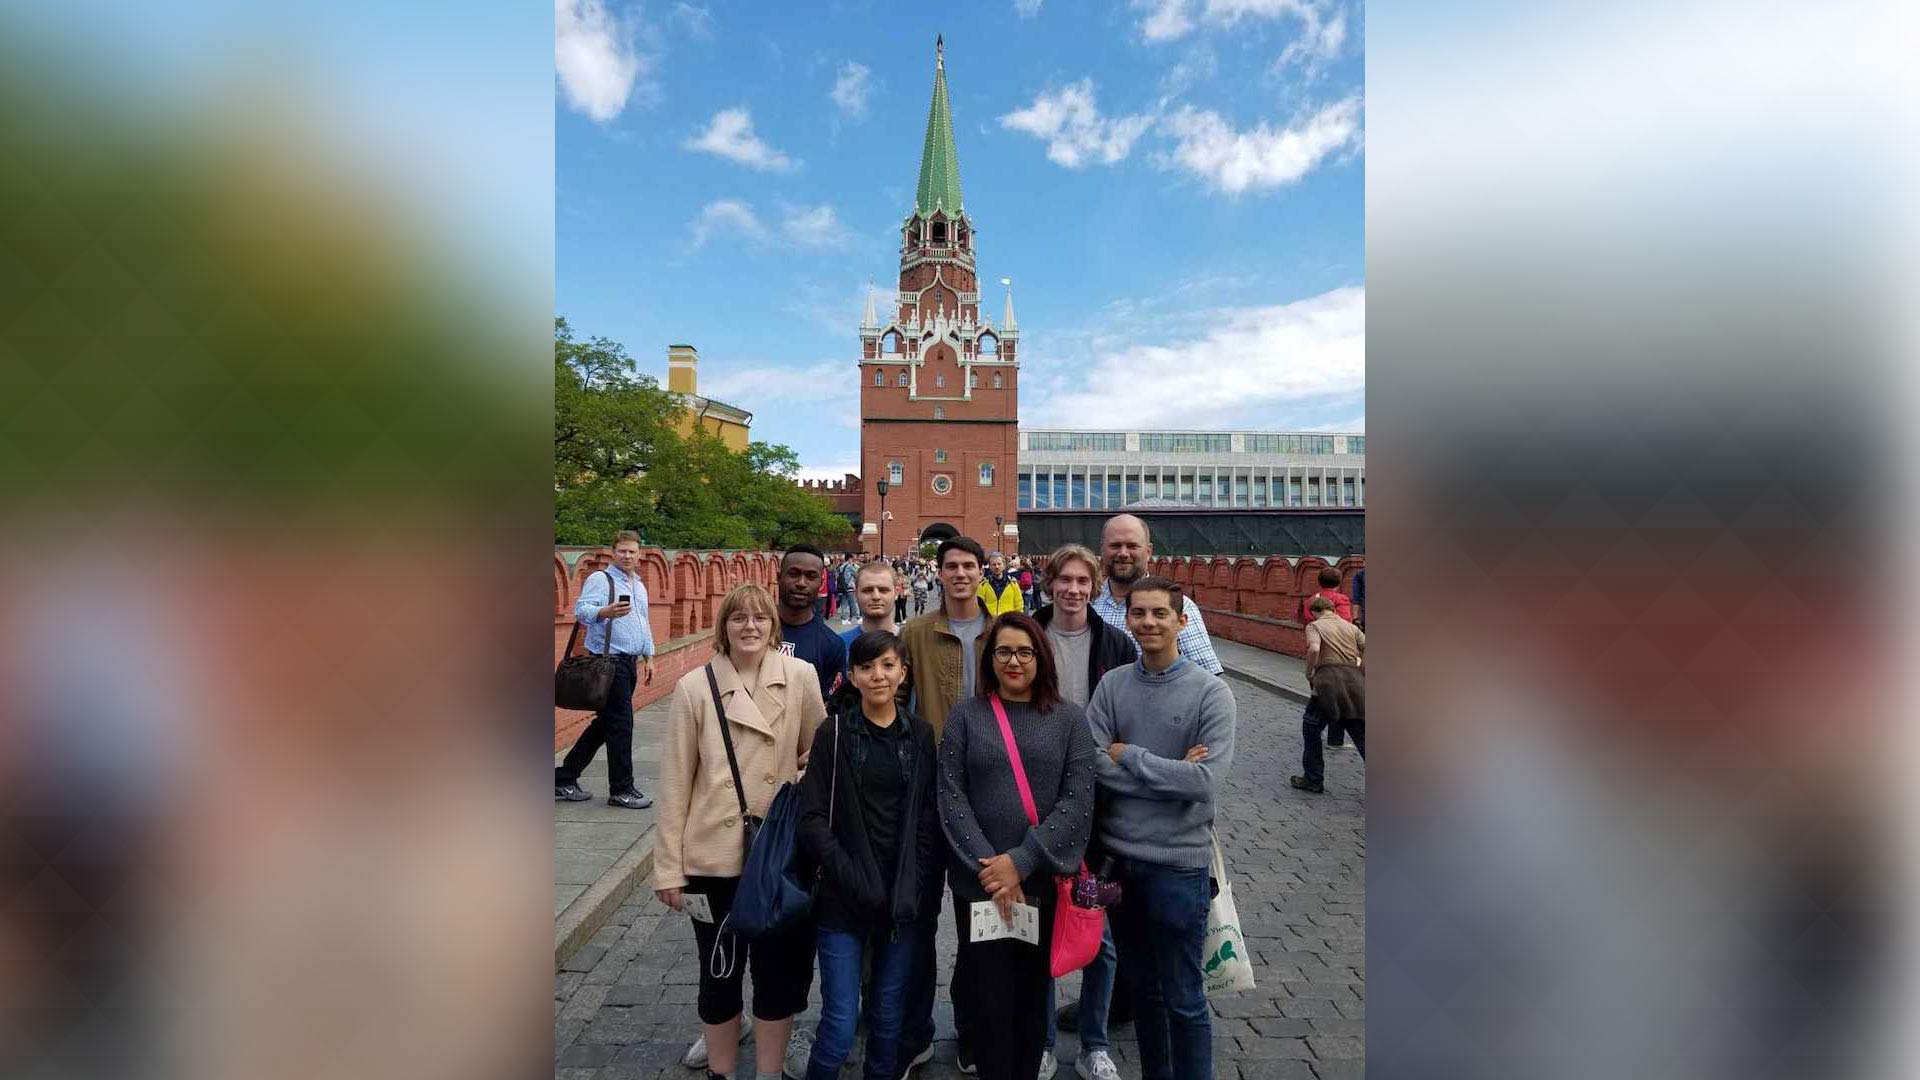 University of Arizona students outside the Kremlin during Russia's 2018 World Cup. Back row, left to right: Khalil Webb, Ben Yurovitsky, Matthew Grimes, Dylan Tucker and Prof. Benjamin Jens. Front row: Charlotte Kevis, Aundrea Nebitsi, Melissa Bustamante and Andrew Bedoy.